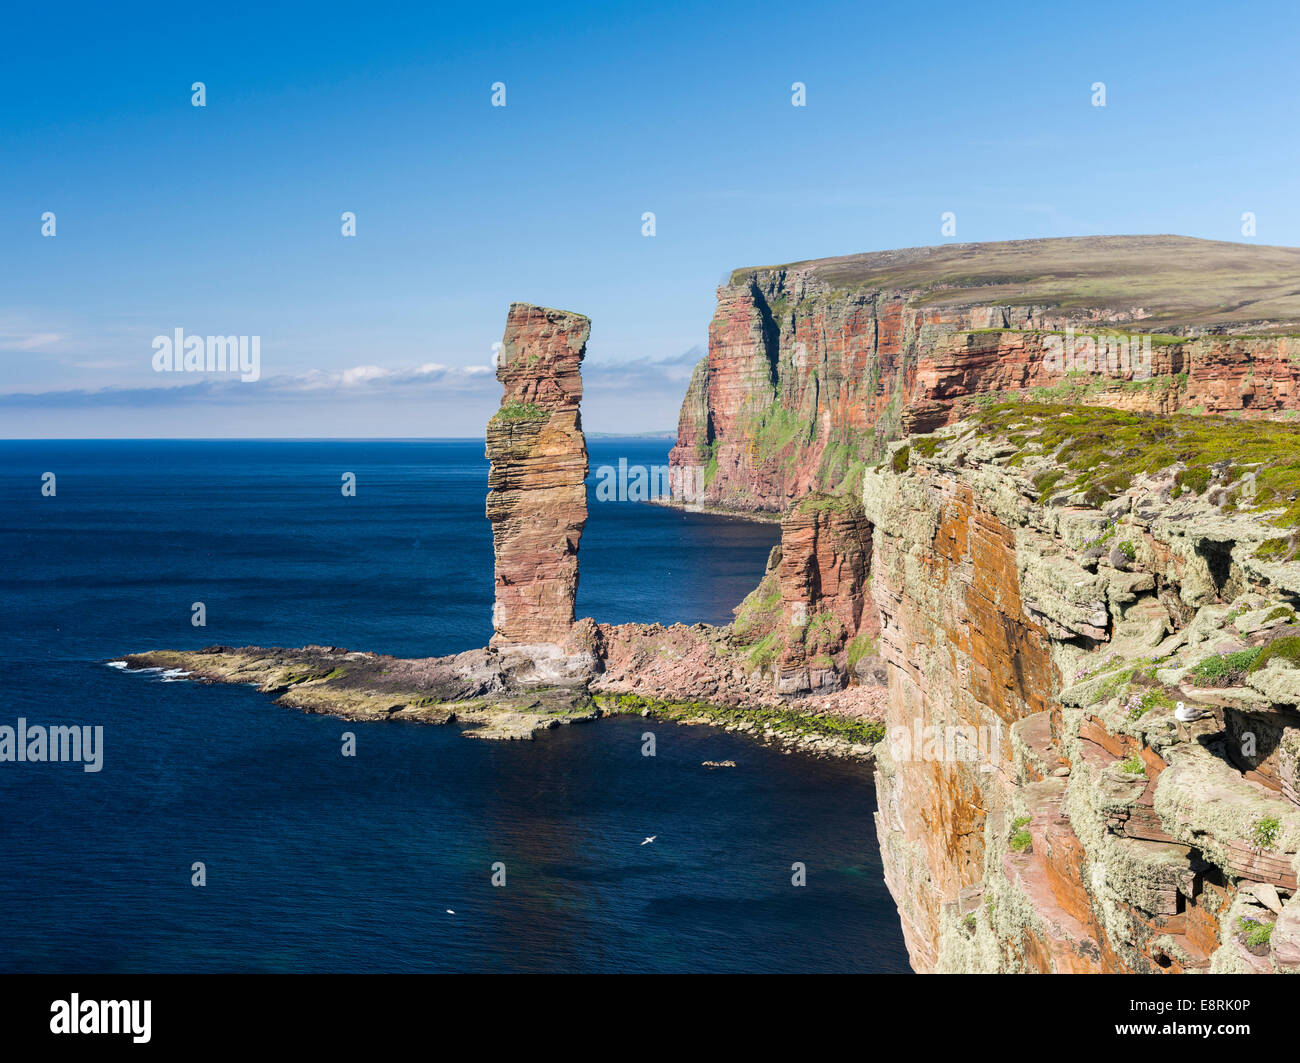 Old Man of Hoy, one of the icons of the Orkney islands, Orkney islands, Scotland. (Large format sizes available) Stock Photo